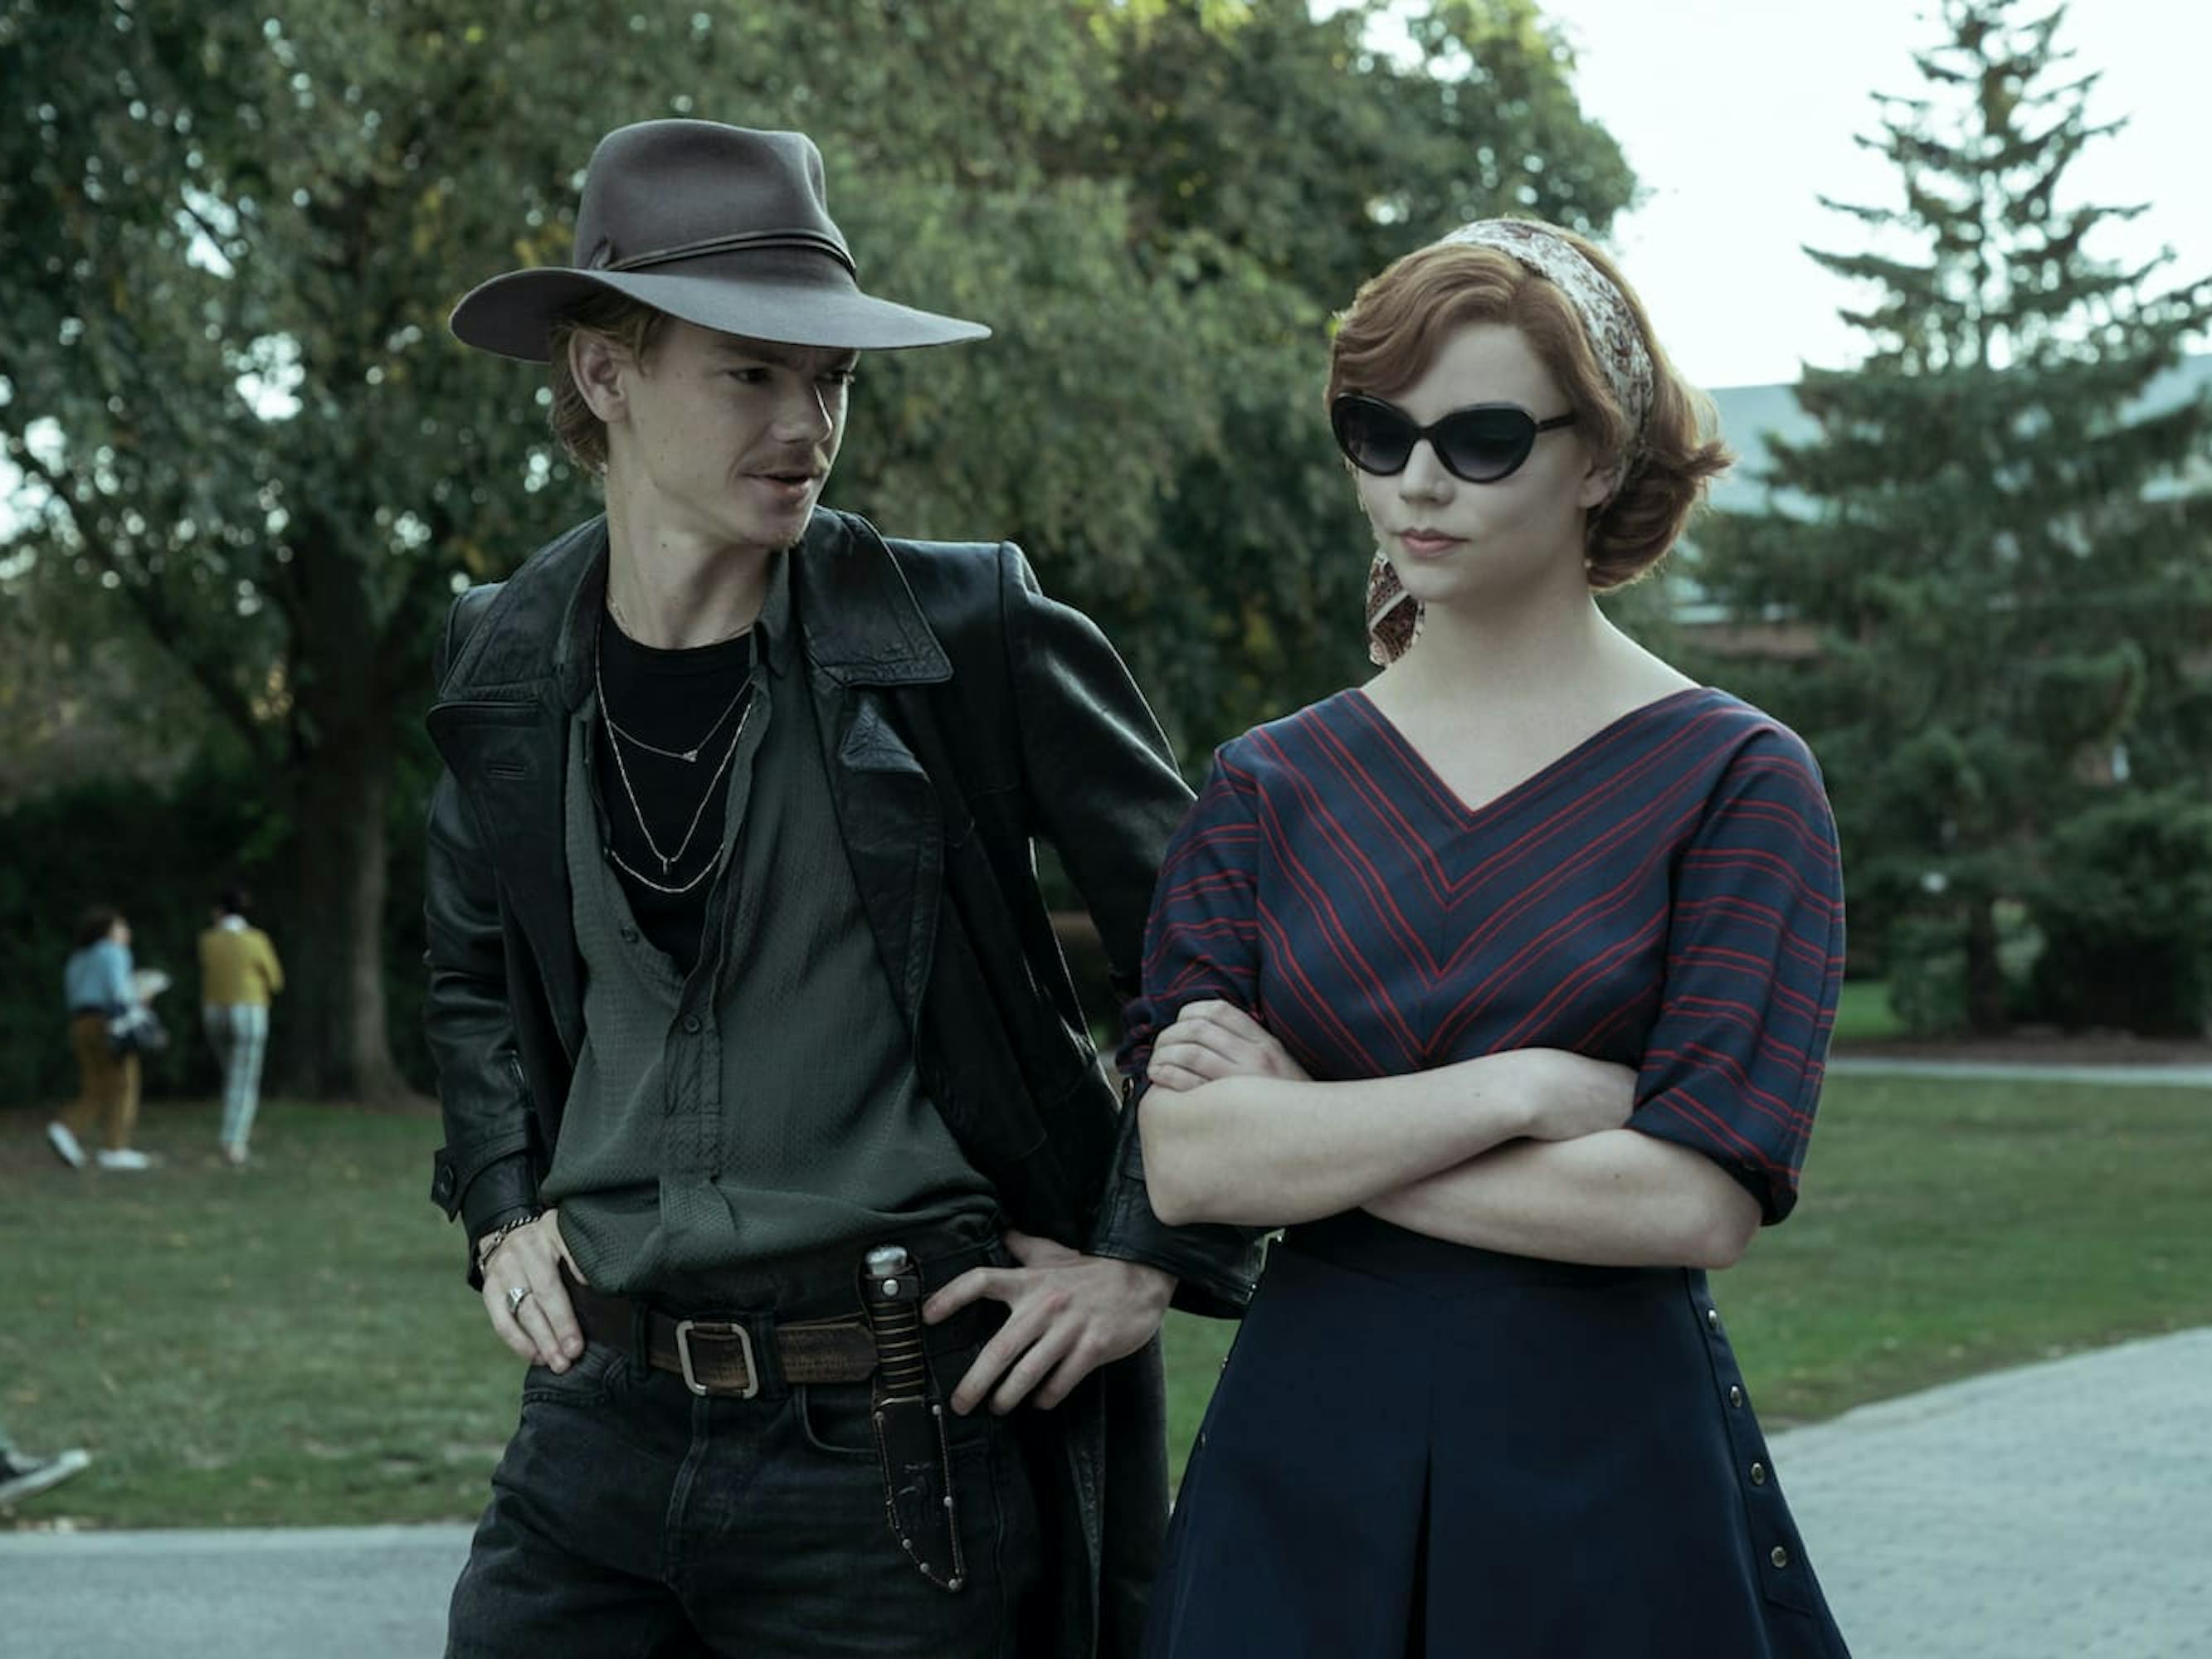 Benny Watts (Thomas Brodie-Sangster) and Beth Harmon (Anya Taylor-Joy stand together outside. Benny wears a leather jacket and wide brimmed hat. Beth wears a striped navy and red shirt and dark sunglasses.